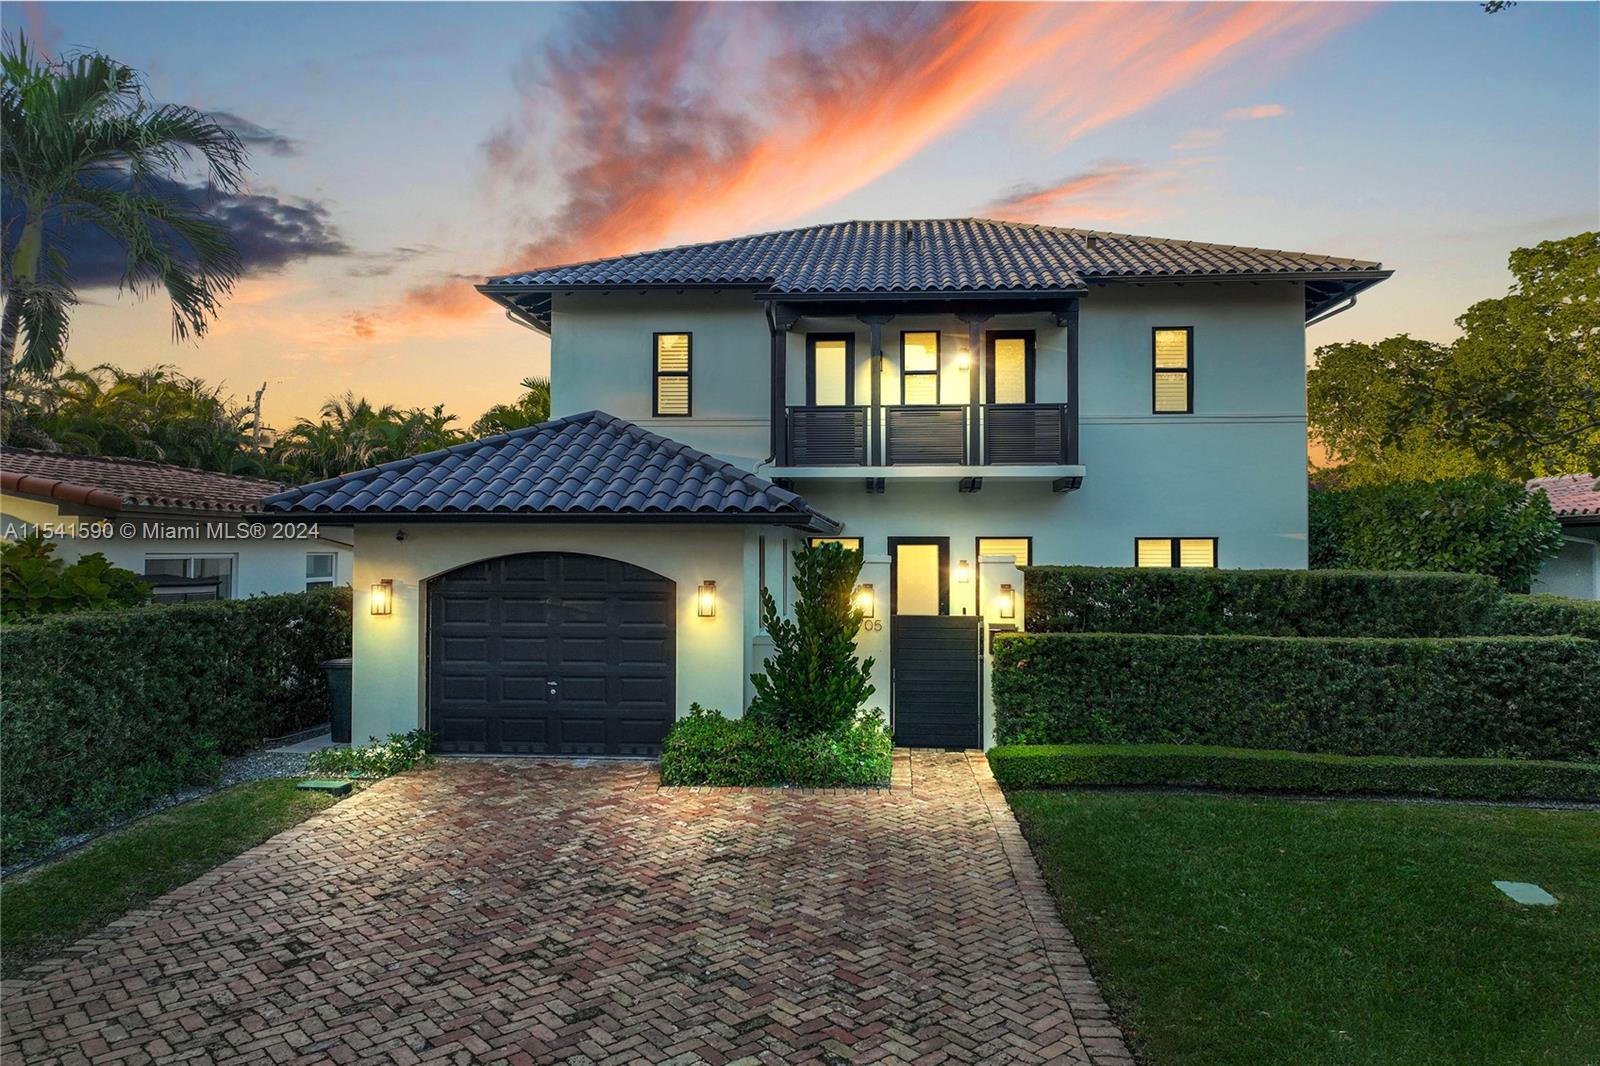 Photo of 705 Madeira Ave in Coral Gables, FL